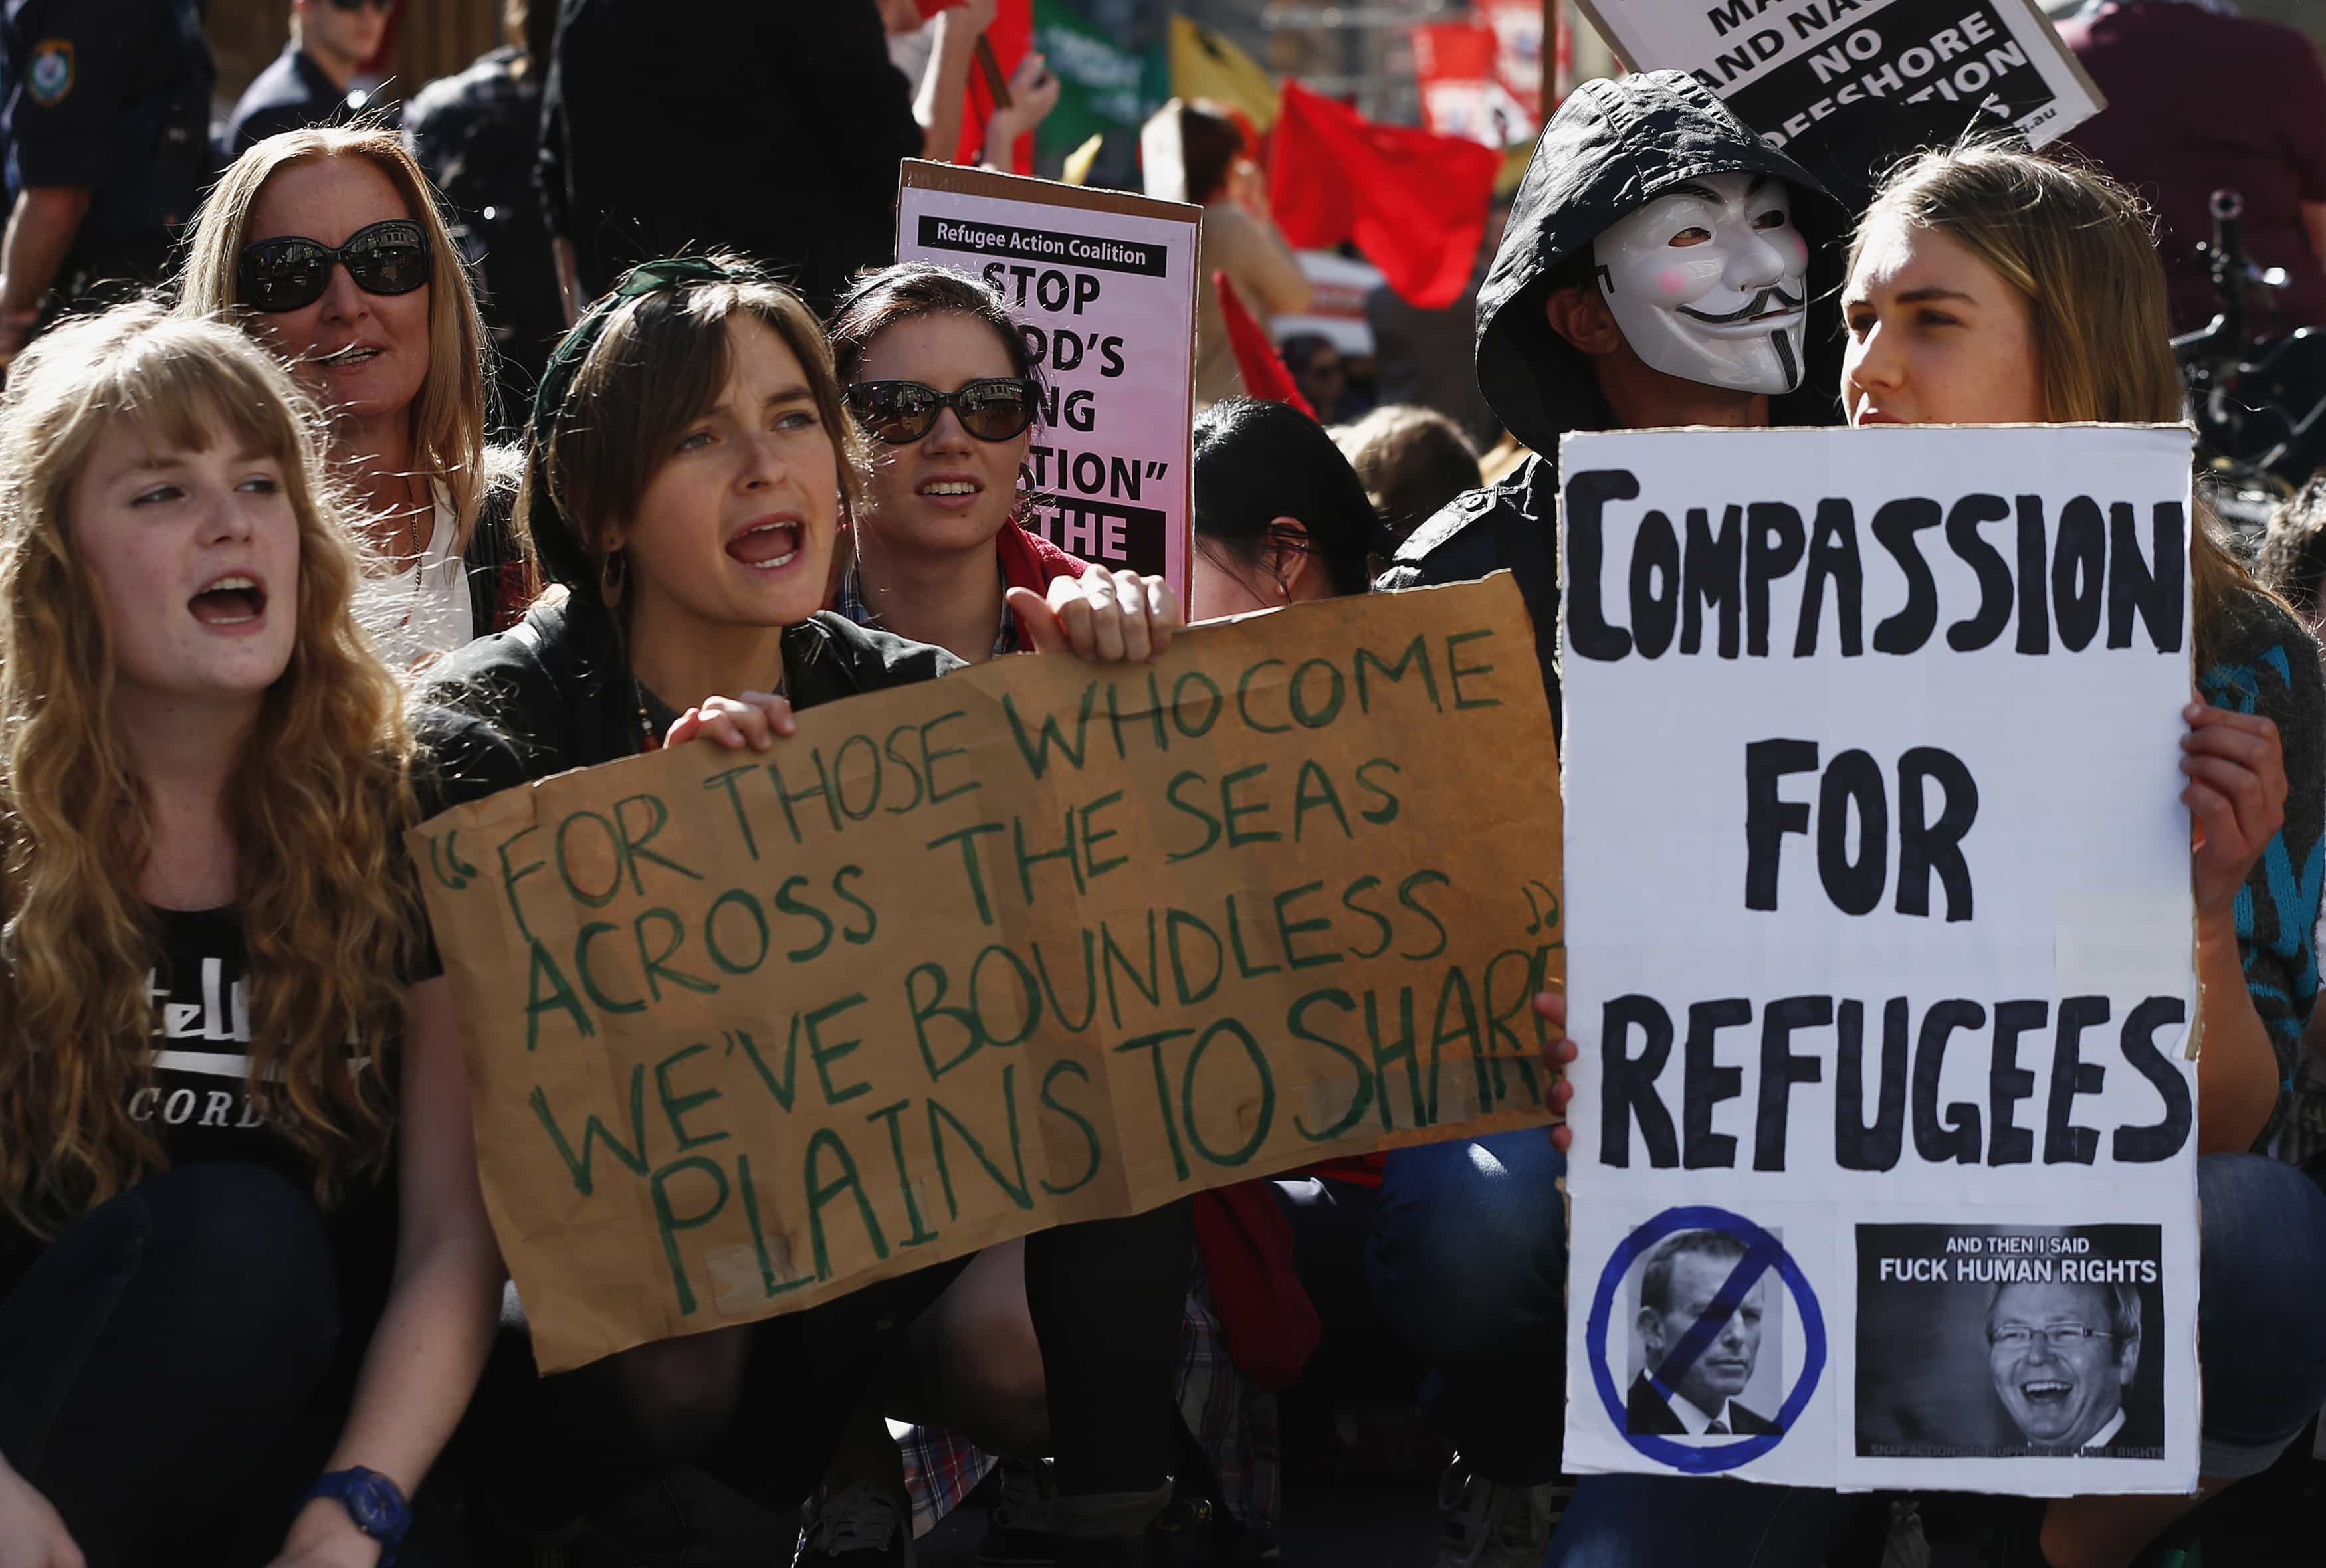 A rally in support of asylum seekers in Sydney, Australia, 10 August 2013; in 2013 Australian Prime Minister Kevin Rudd announced tough measures to deter asylum seekers, saying anyone who arrived by boat would be sent to Papua New Guinea or Nauru for processing and resettlement, REUTERS/Daniel Munoz